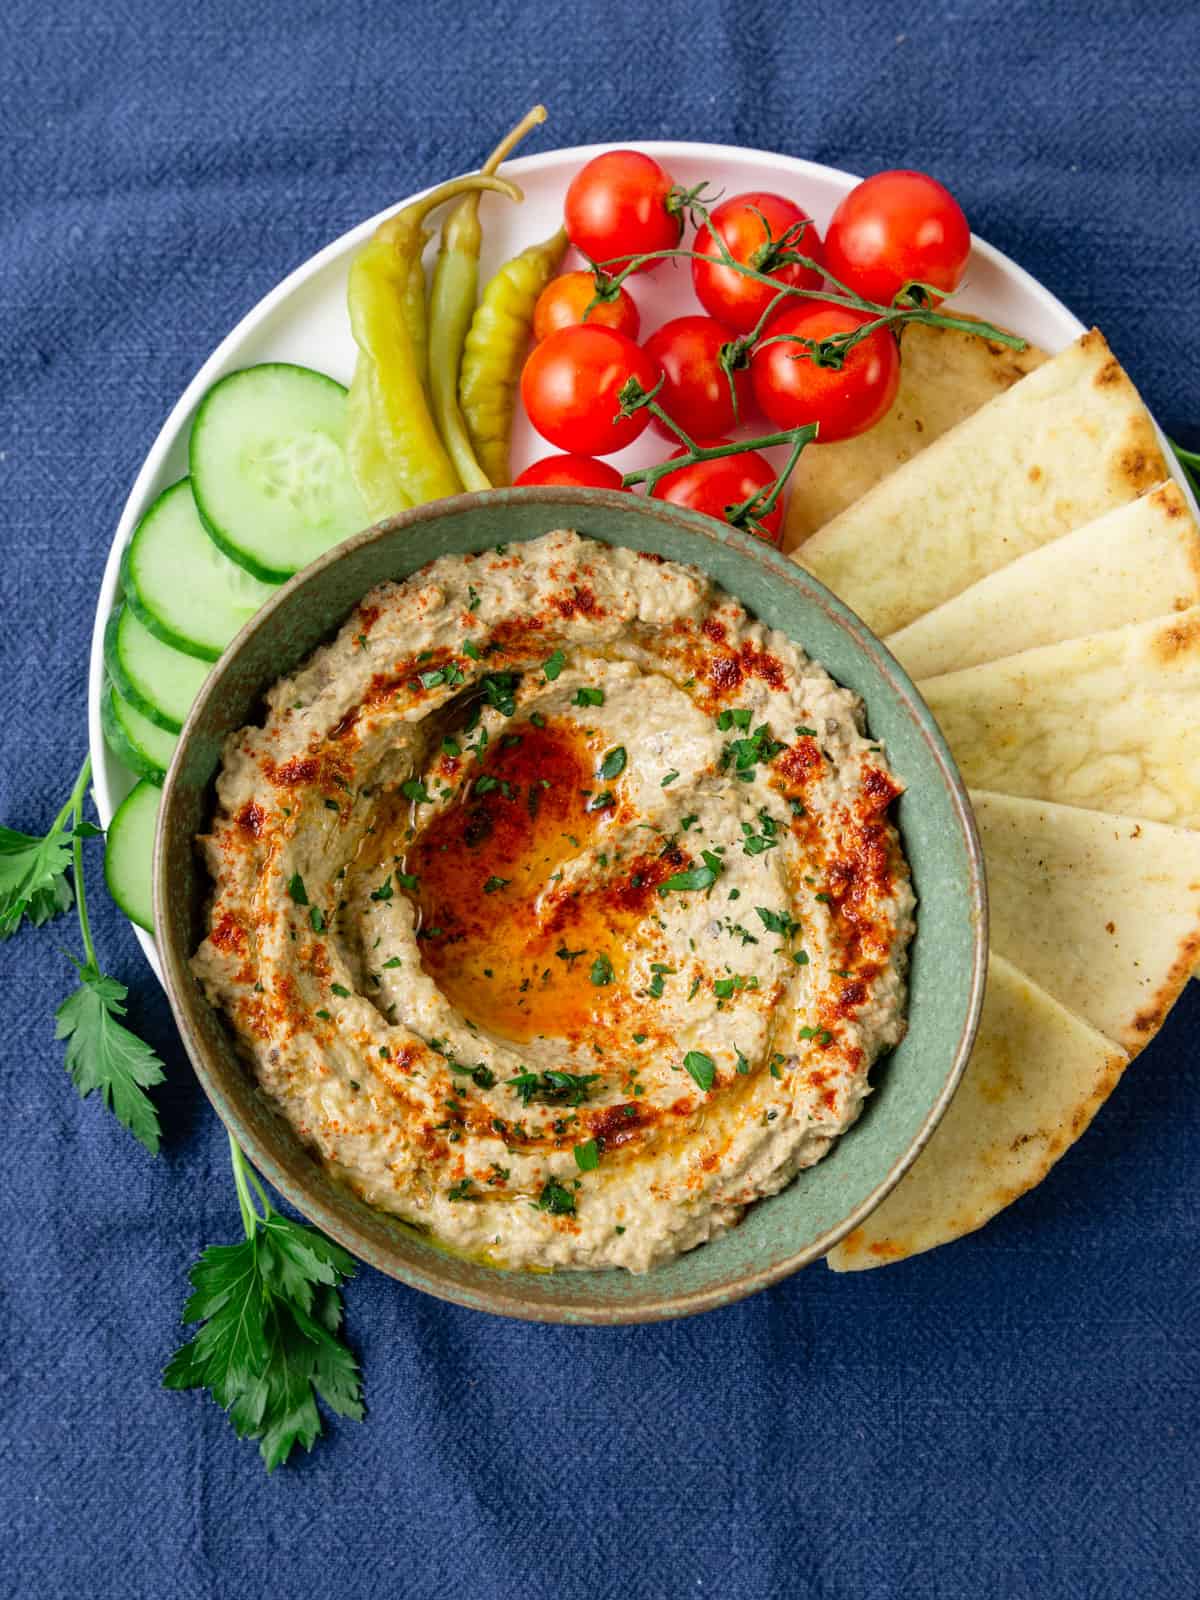 Lebanese baba ganoush recipe served with pita bread and vegetables.